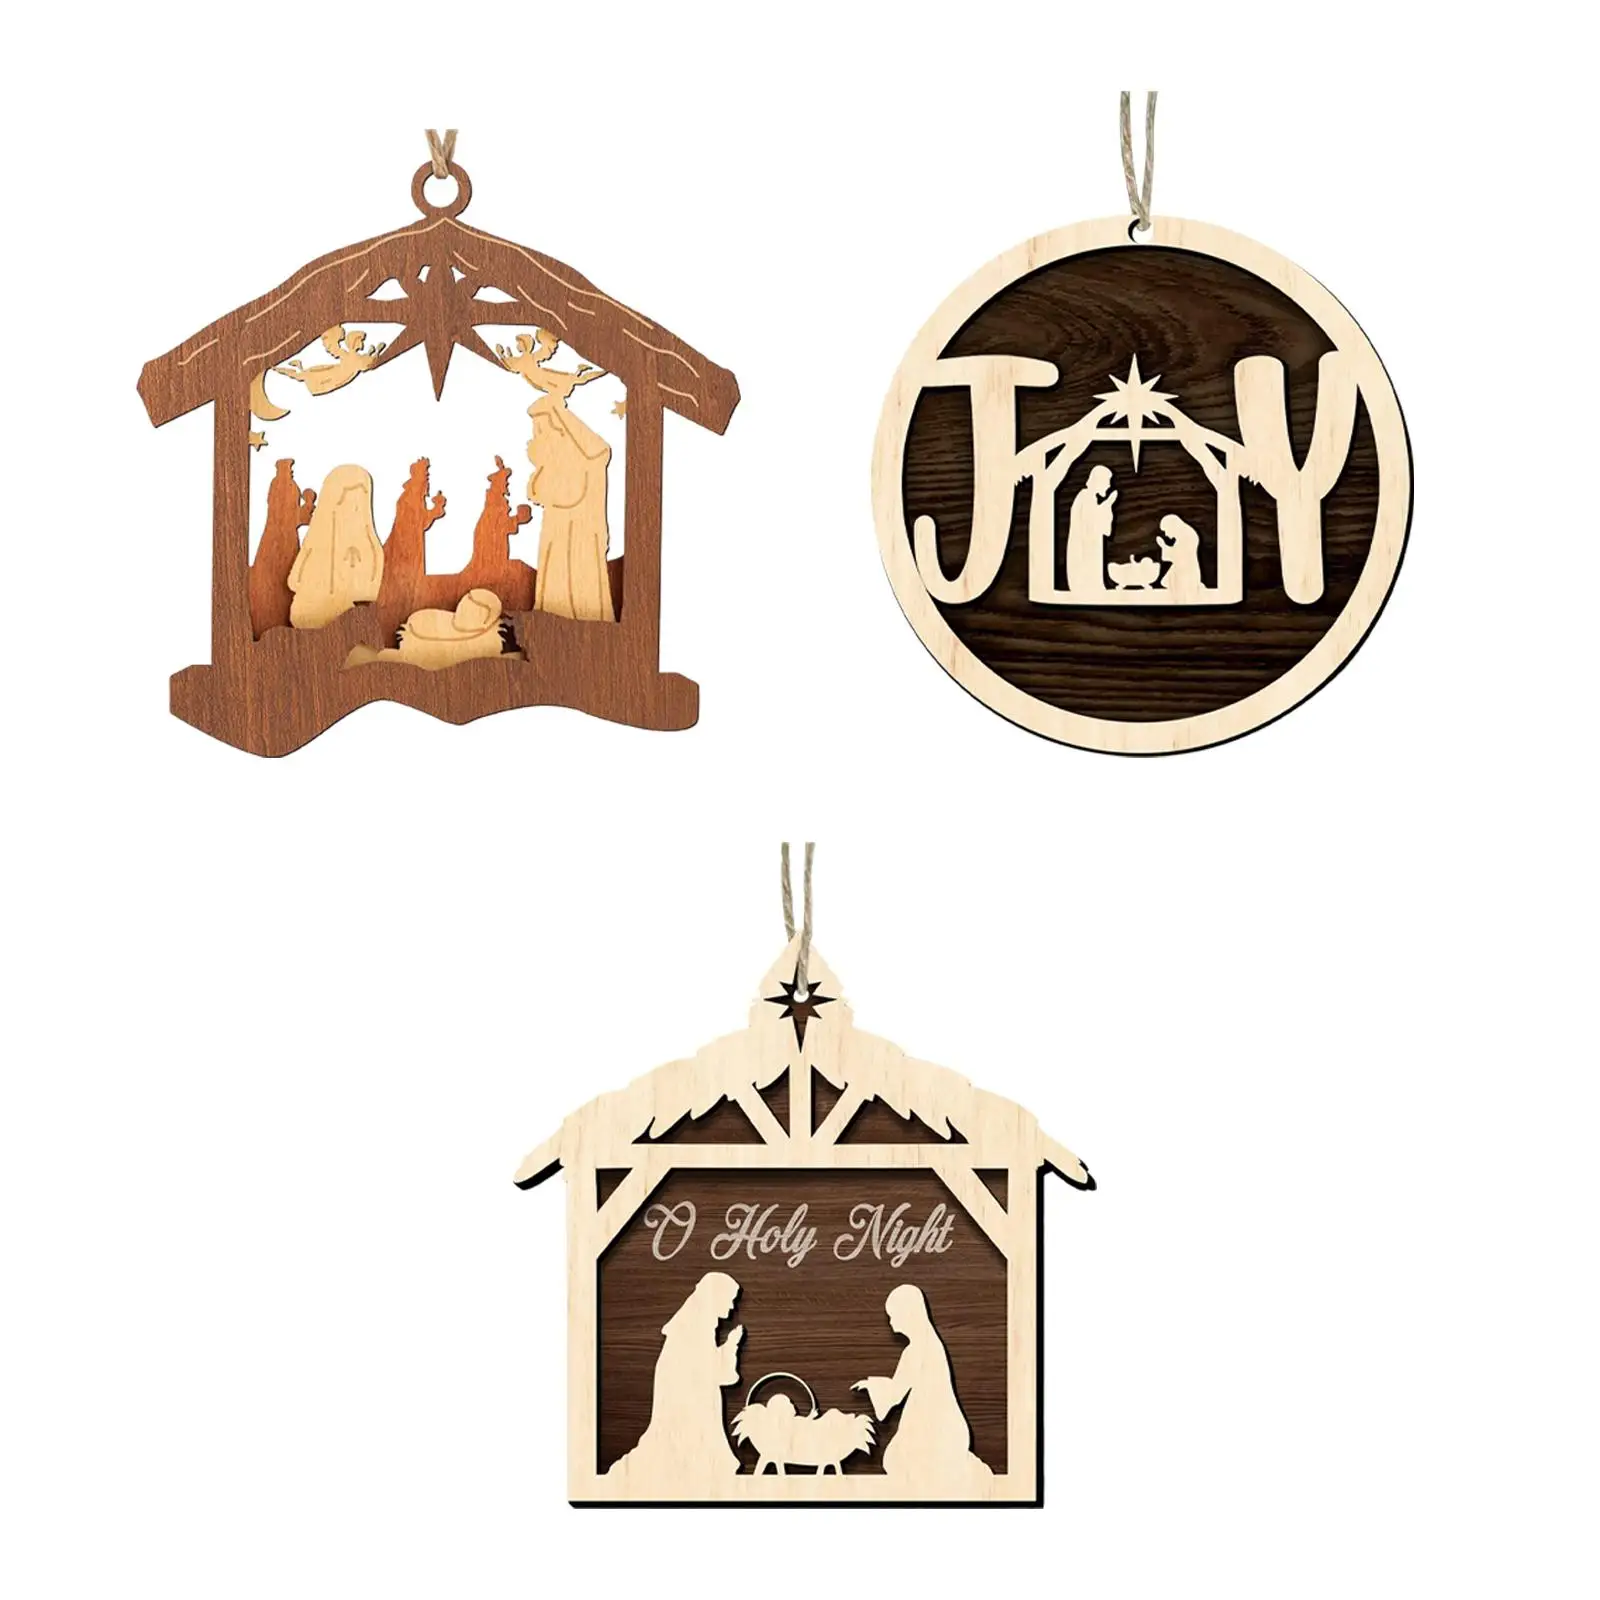 Christmas Nativity Scene Ornaments Rustic Pendant for Tables Fireplace Party